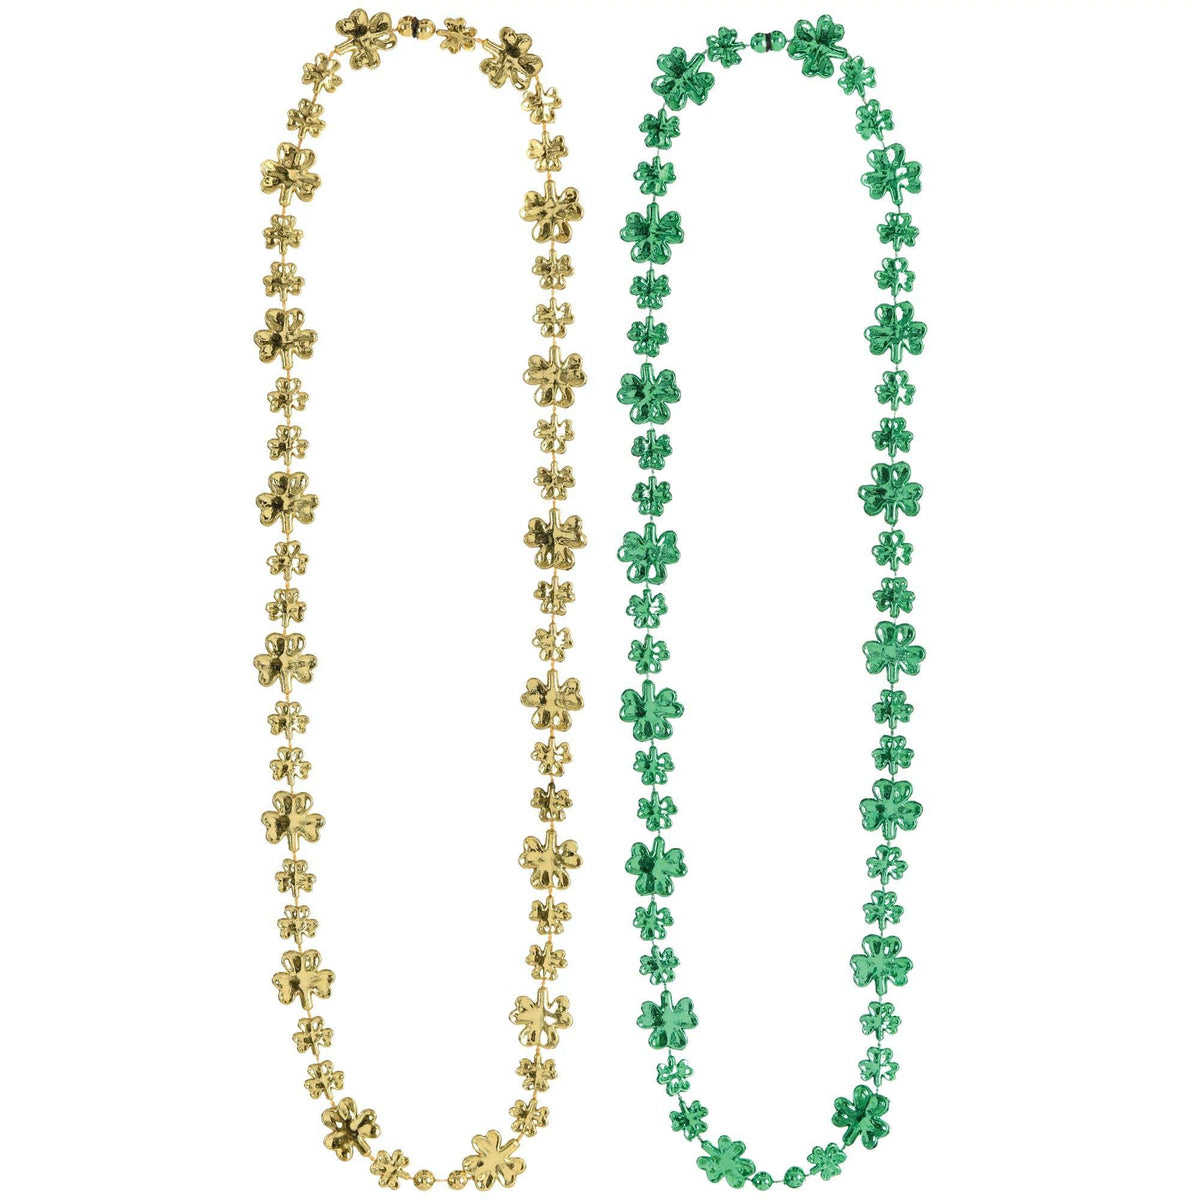 AMSCAN CA St-Patrick St-Patrick's Day Necklaces, 2 Count